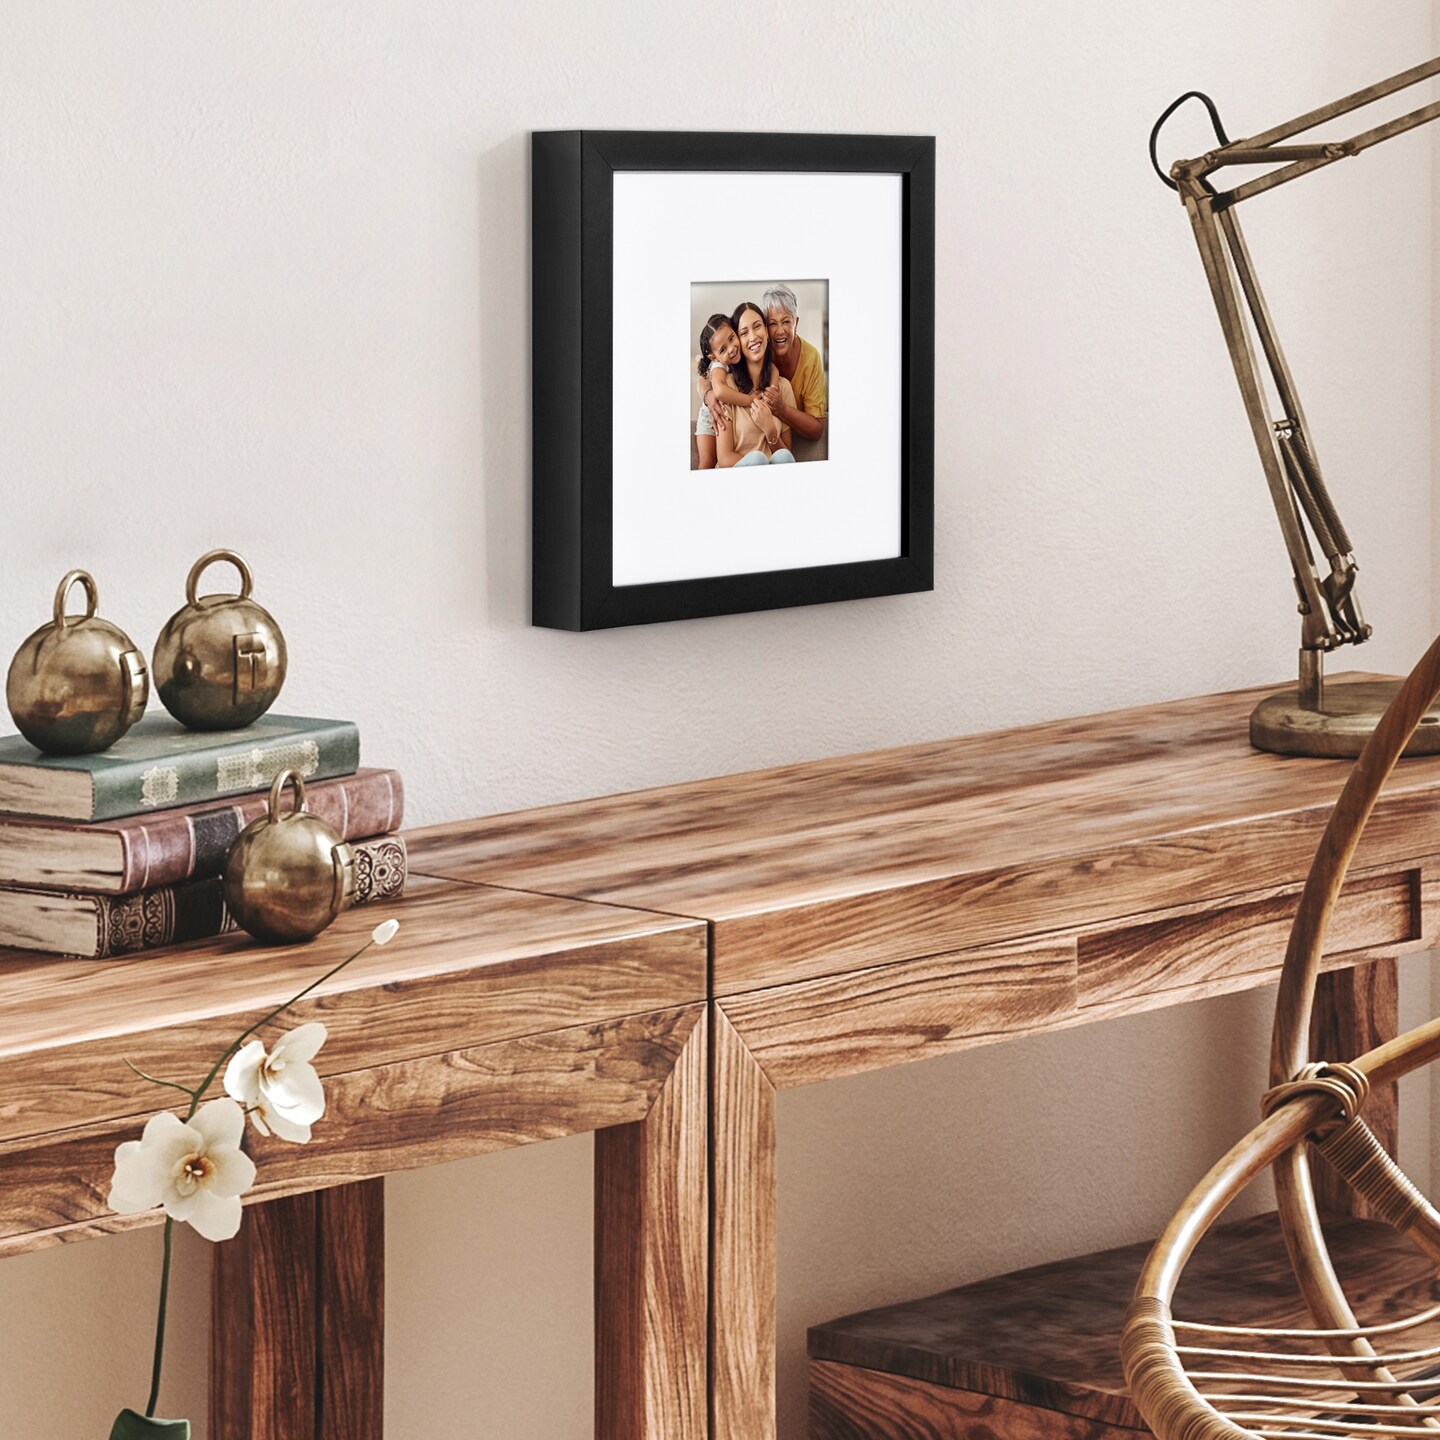 Americanflat Gallery-Style Picture Frame with Mat